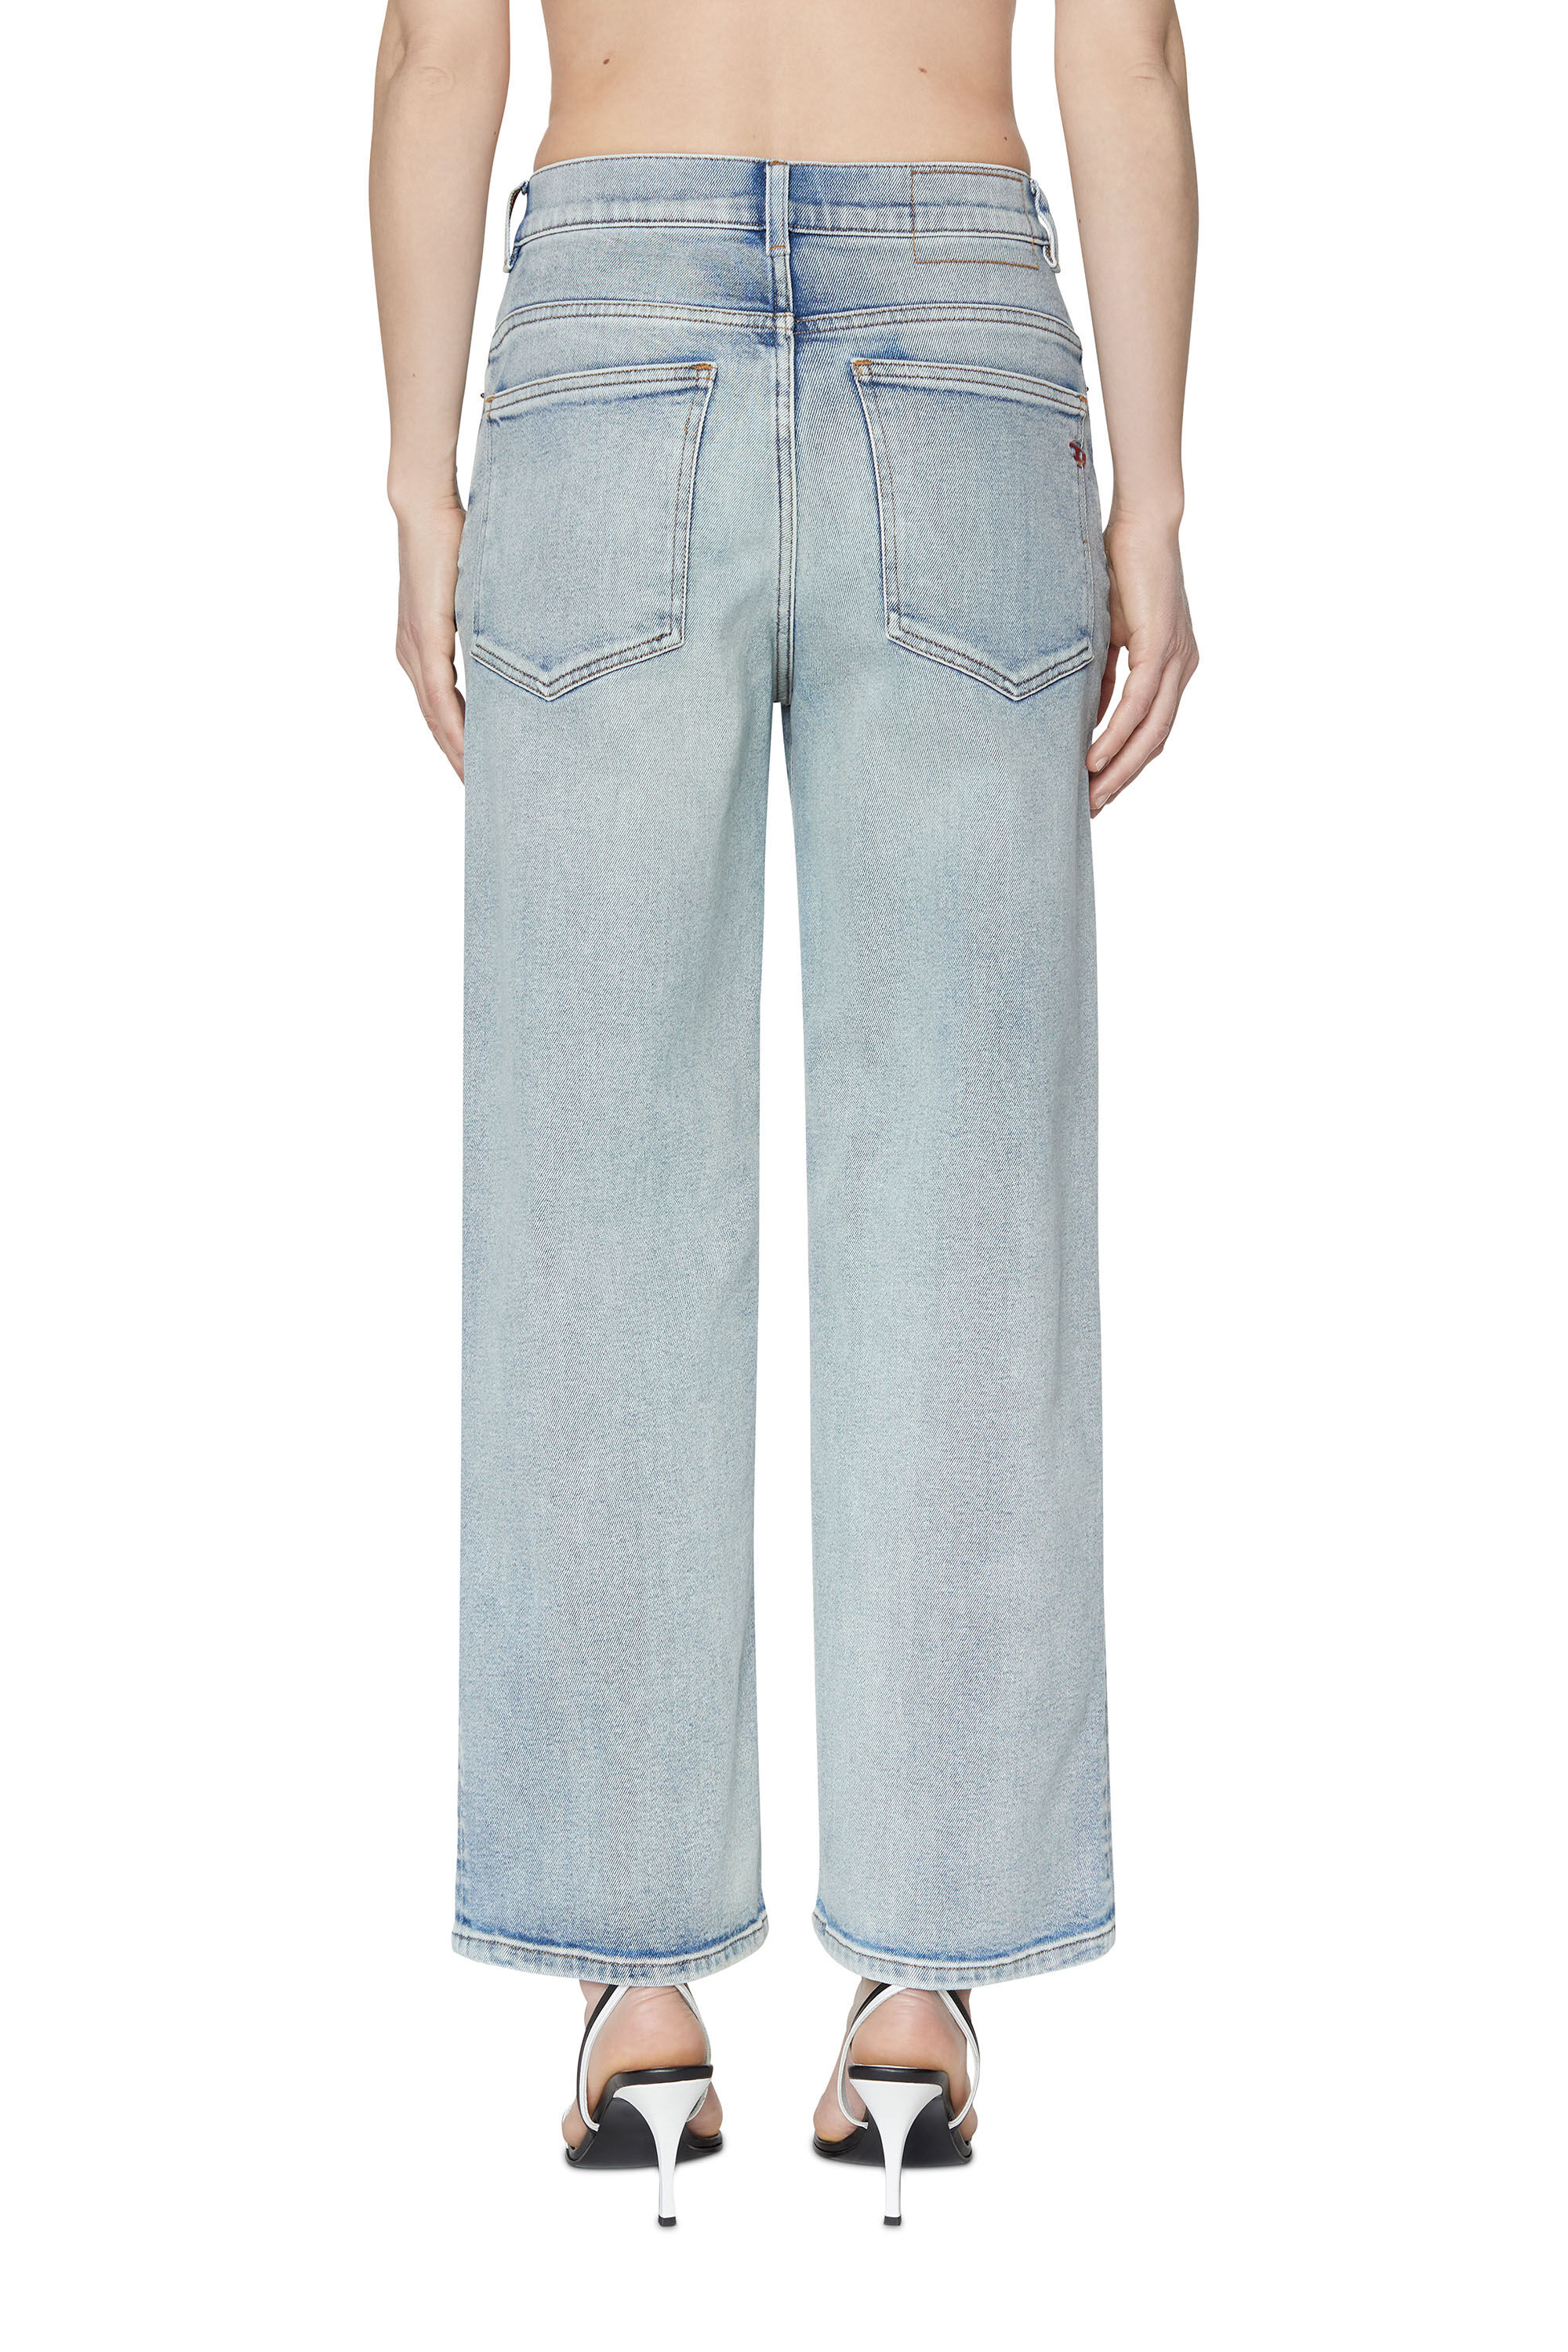 Diesel - 2000 Widee 09C08 Bootcut and Flare Jeans,  - Image 4